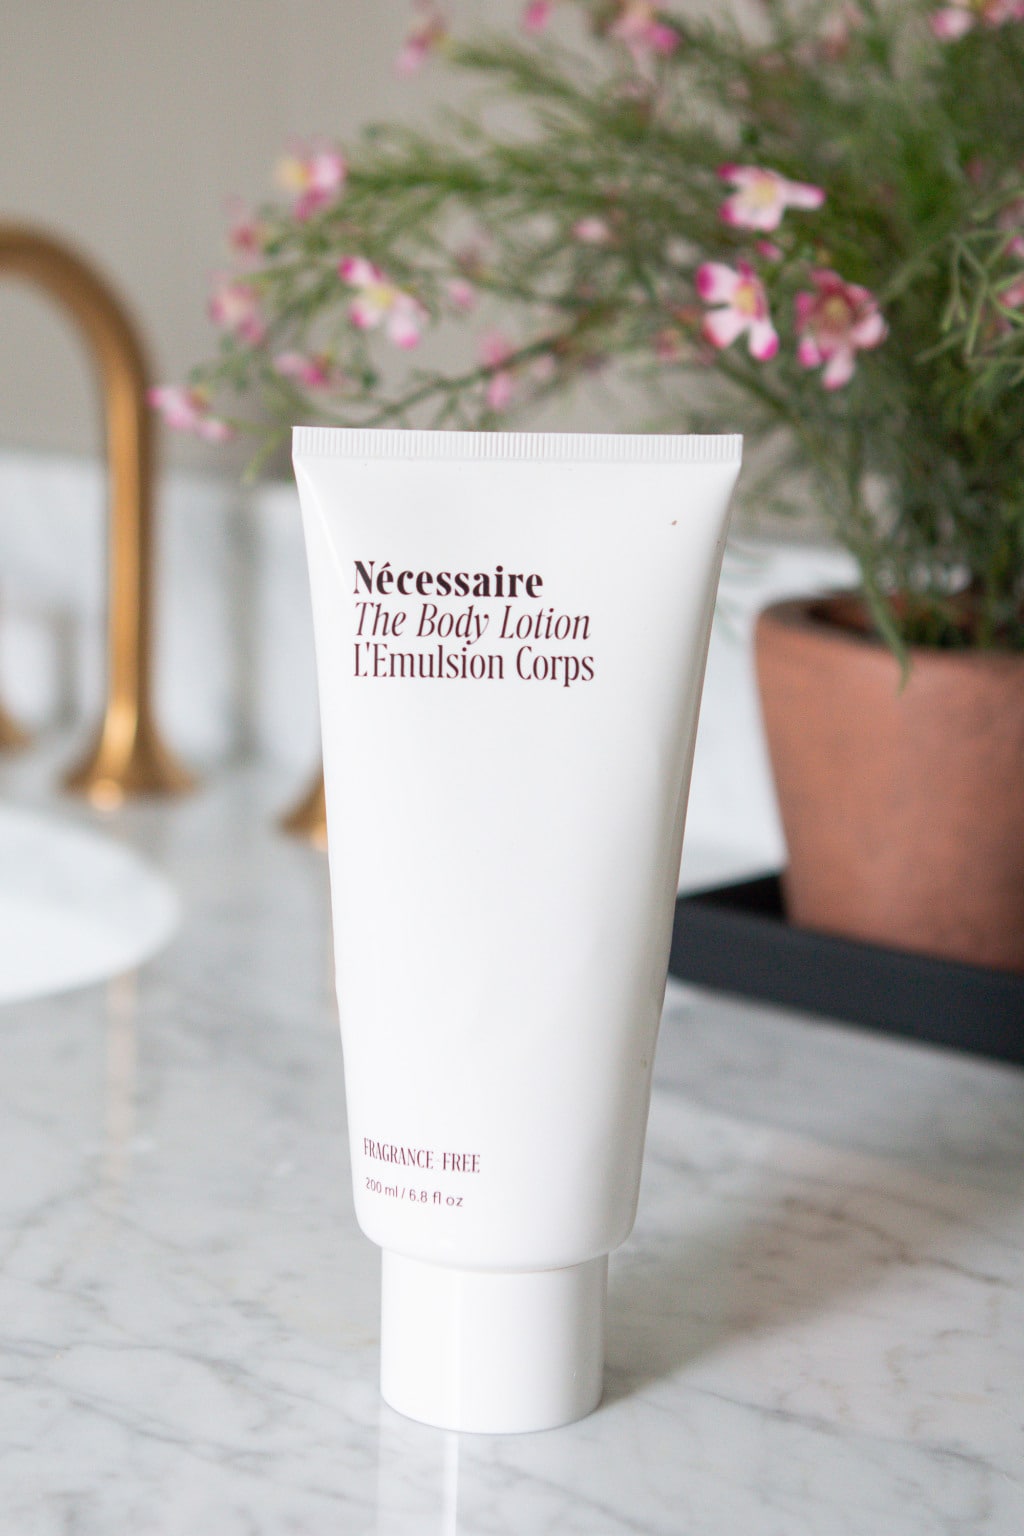 Necessaire body lotion is one of my skincare favorites